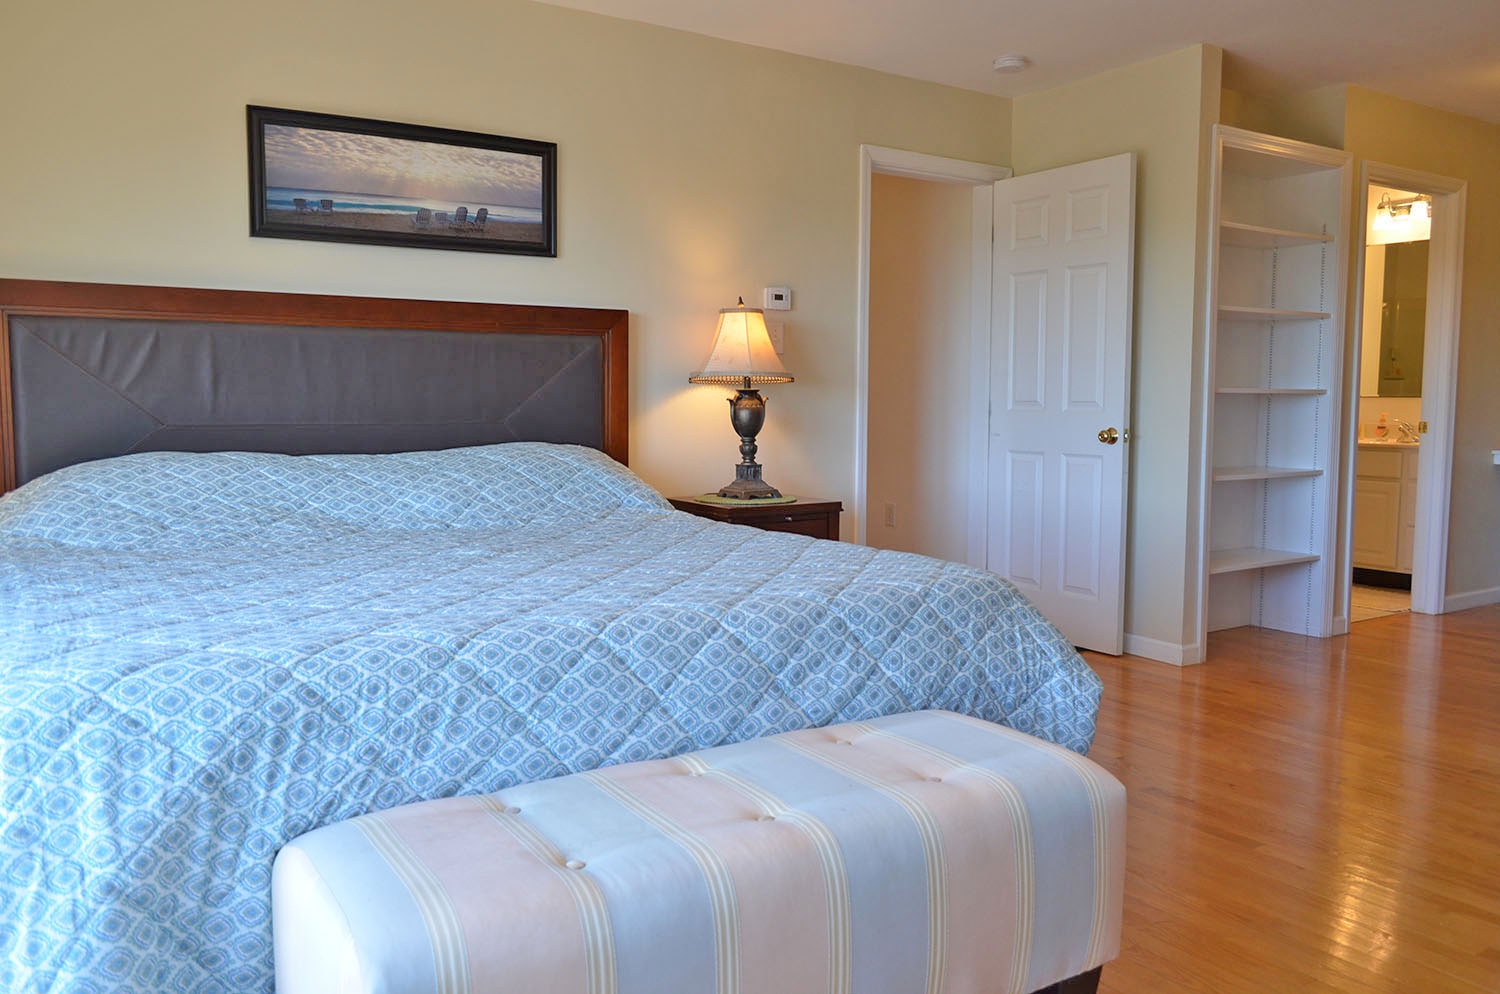 The Master bedroom has a King bed and ensuite bath.